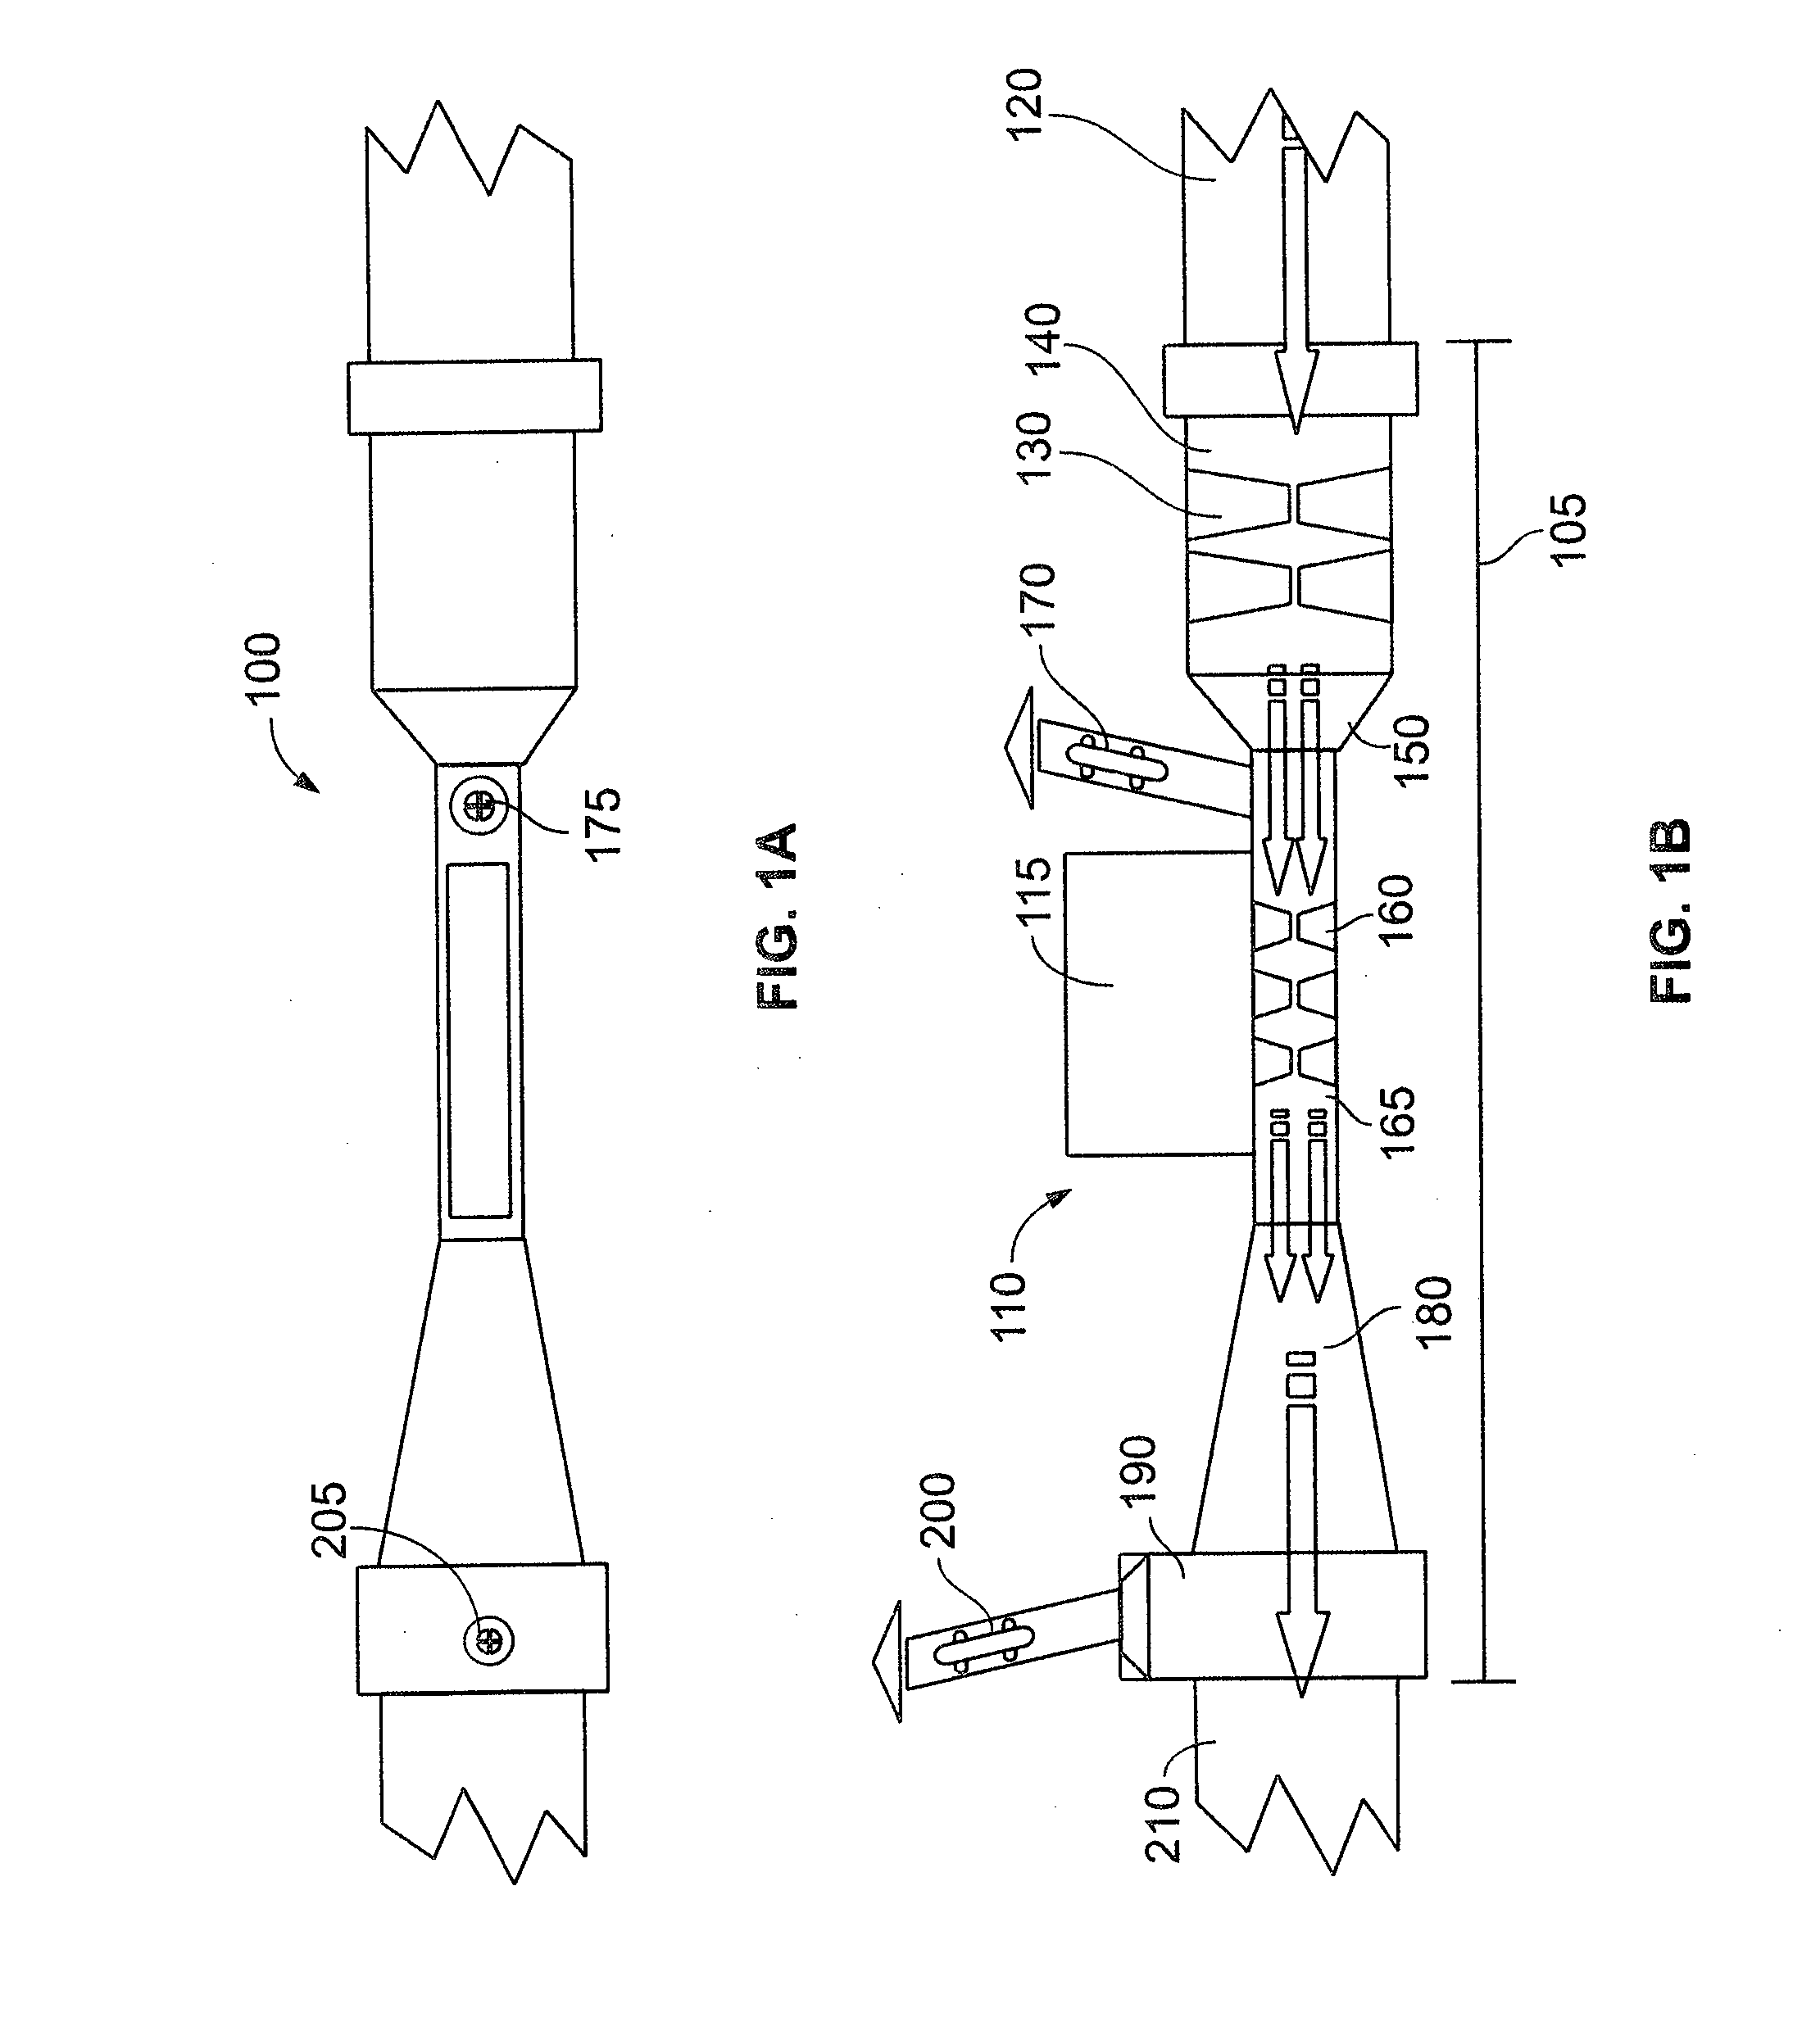 Flow-based energy transport and generation device